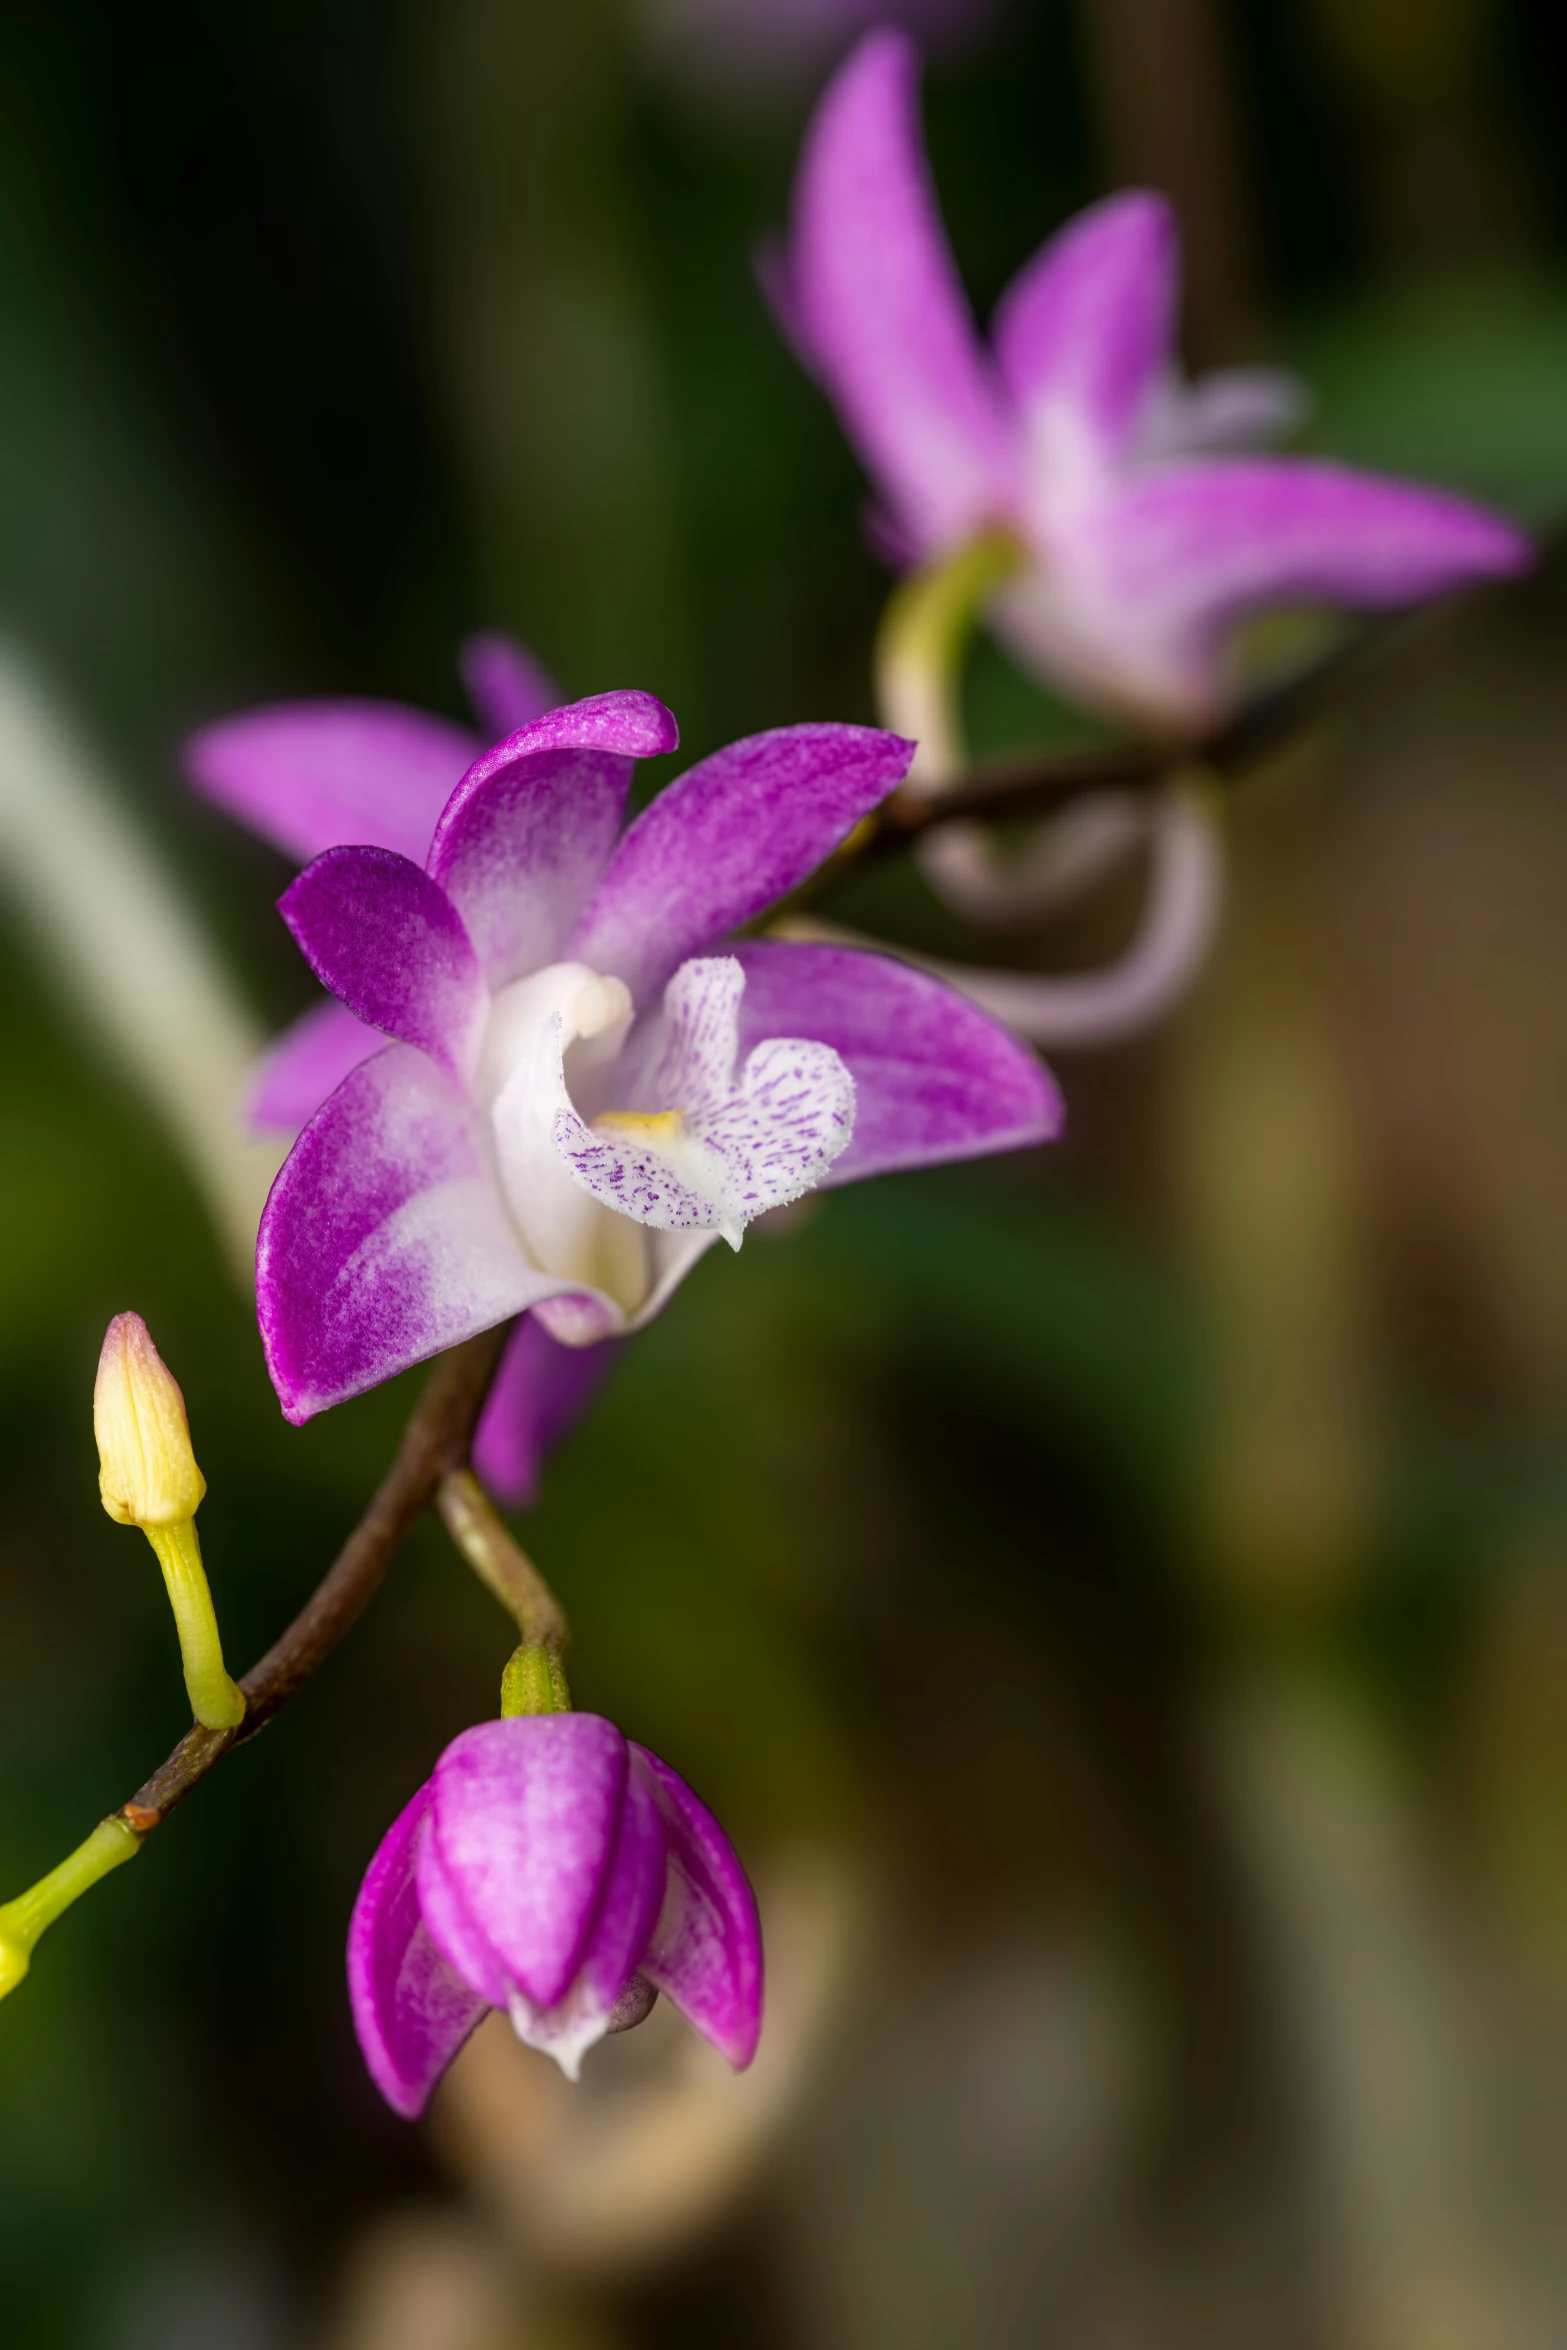 close up image of purple and white flower with stem